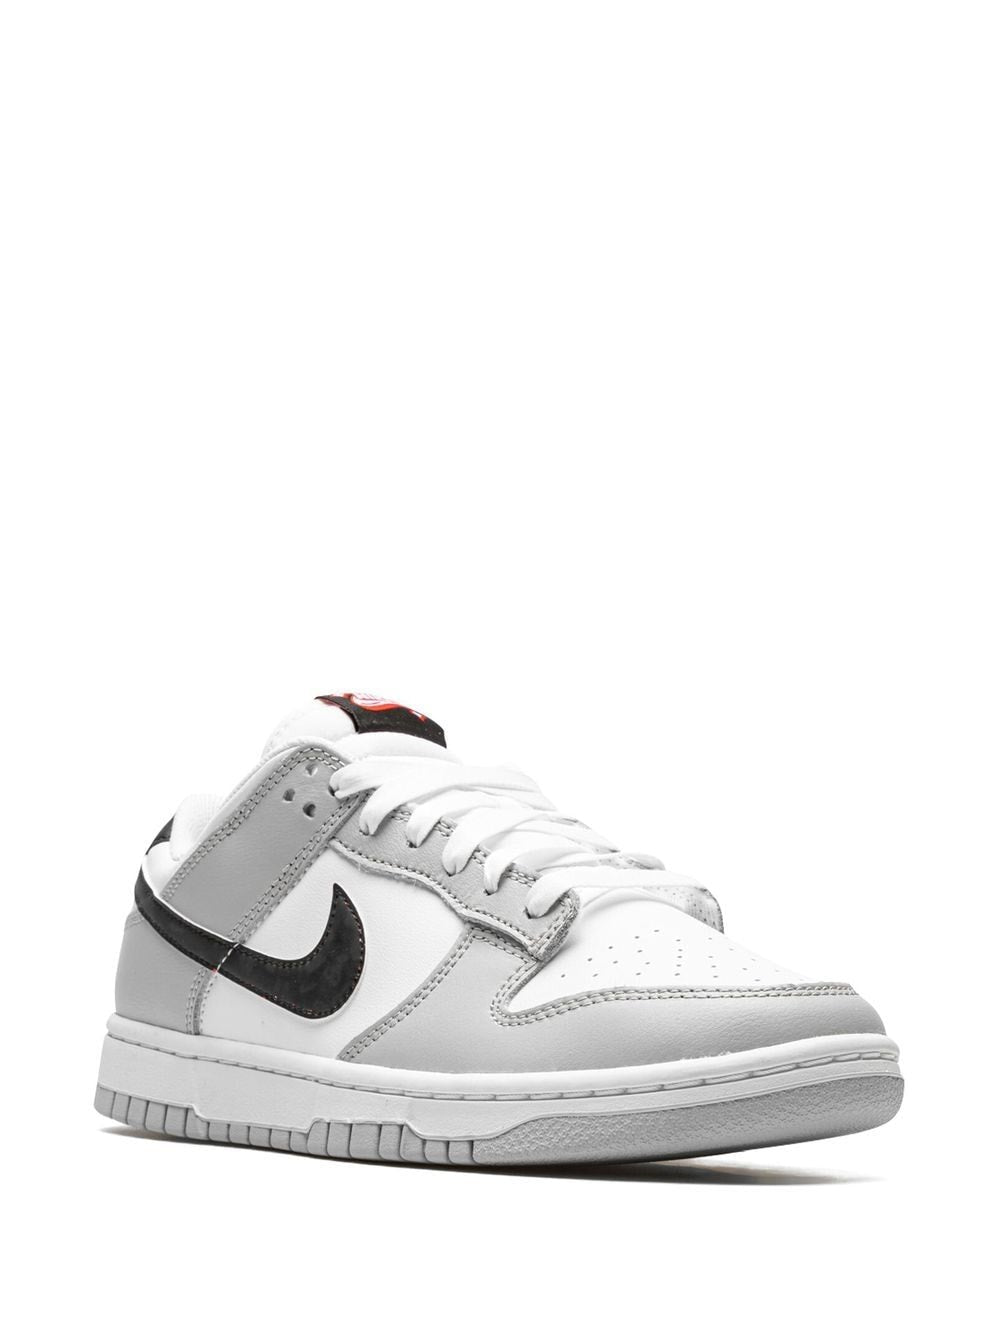 Nike DUNK Lottery Pack Grey